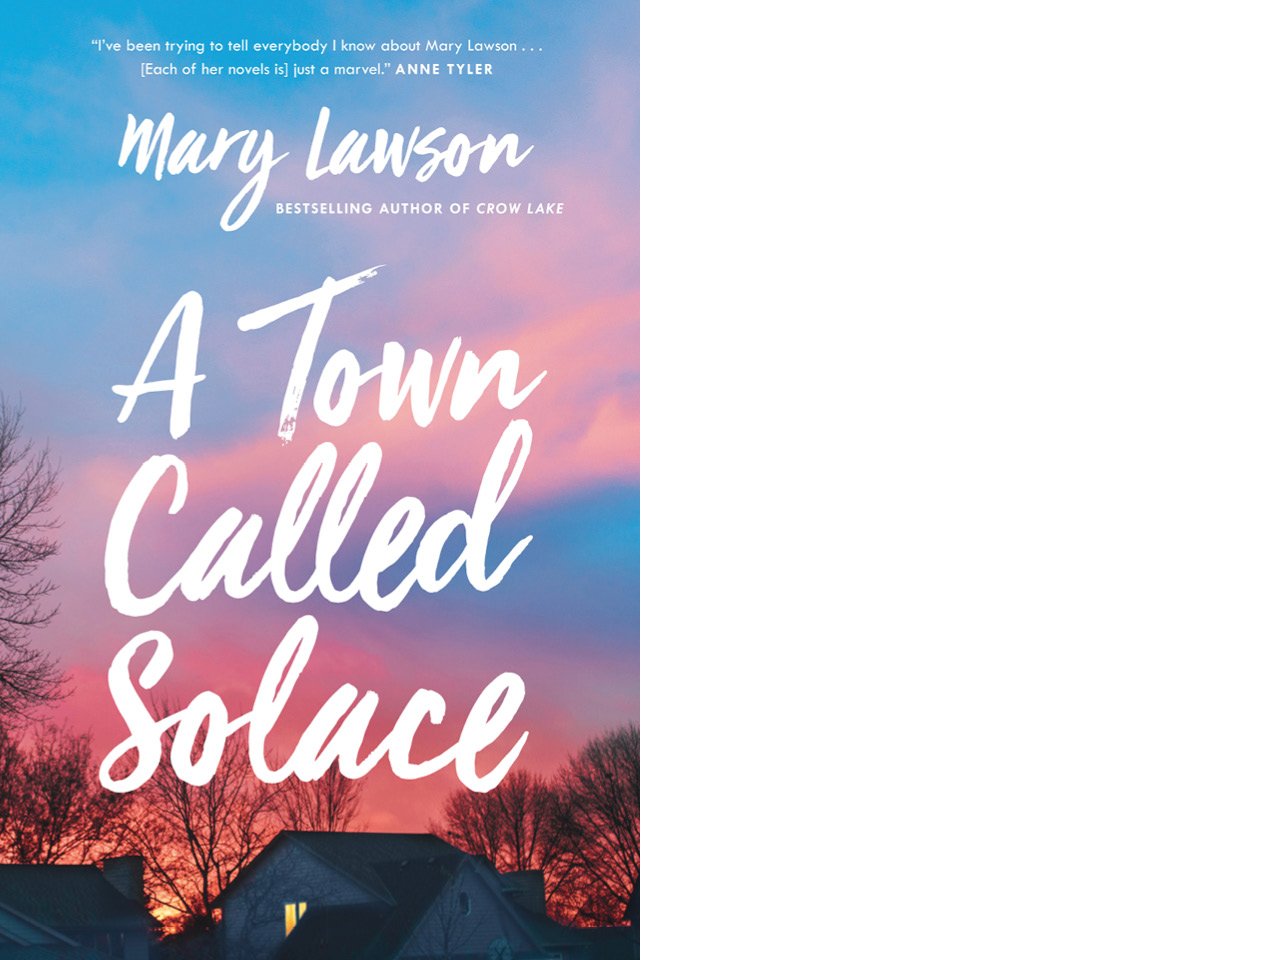 The cover of A Town Called Solace.